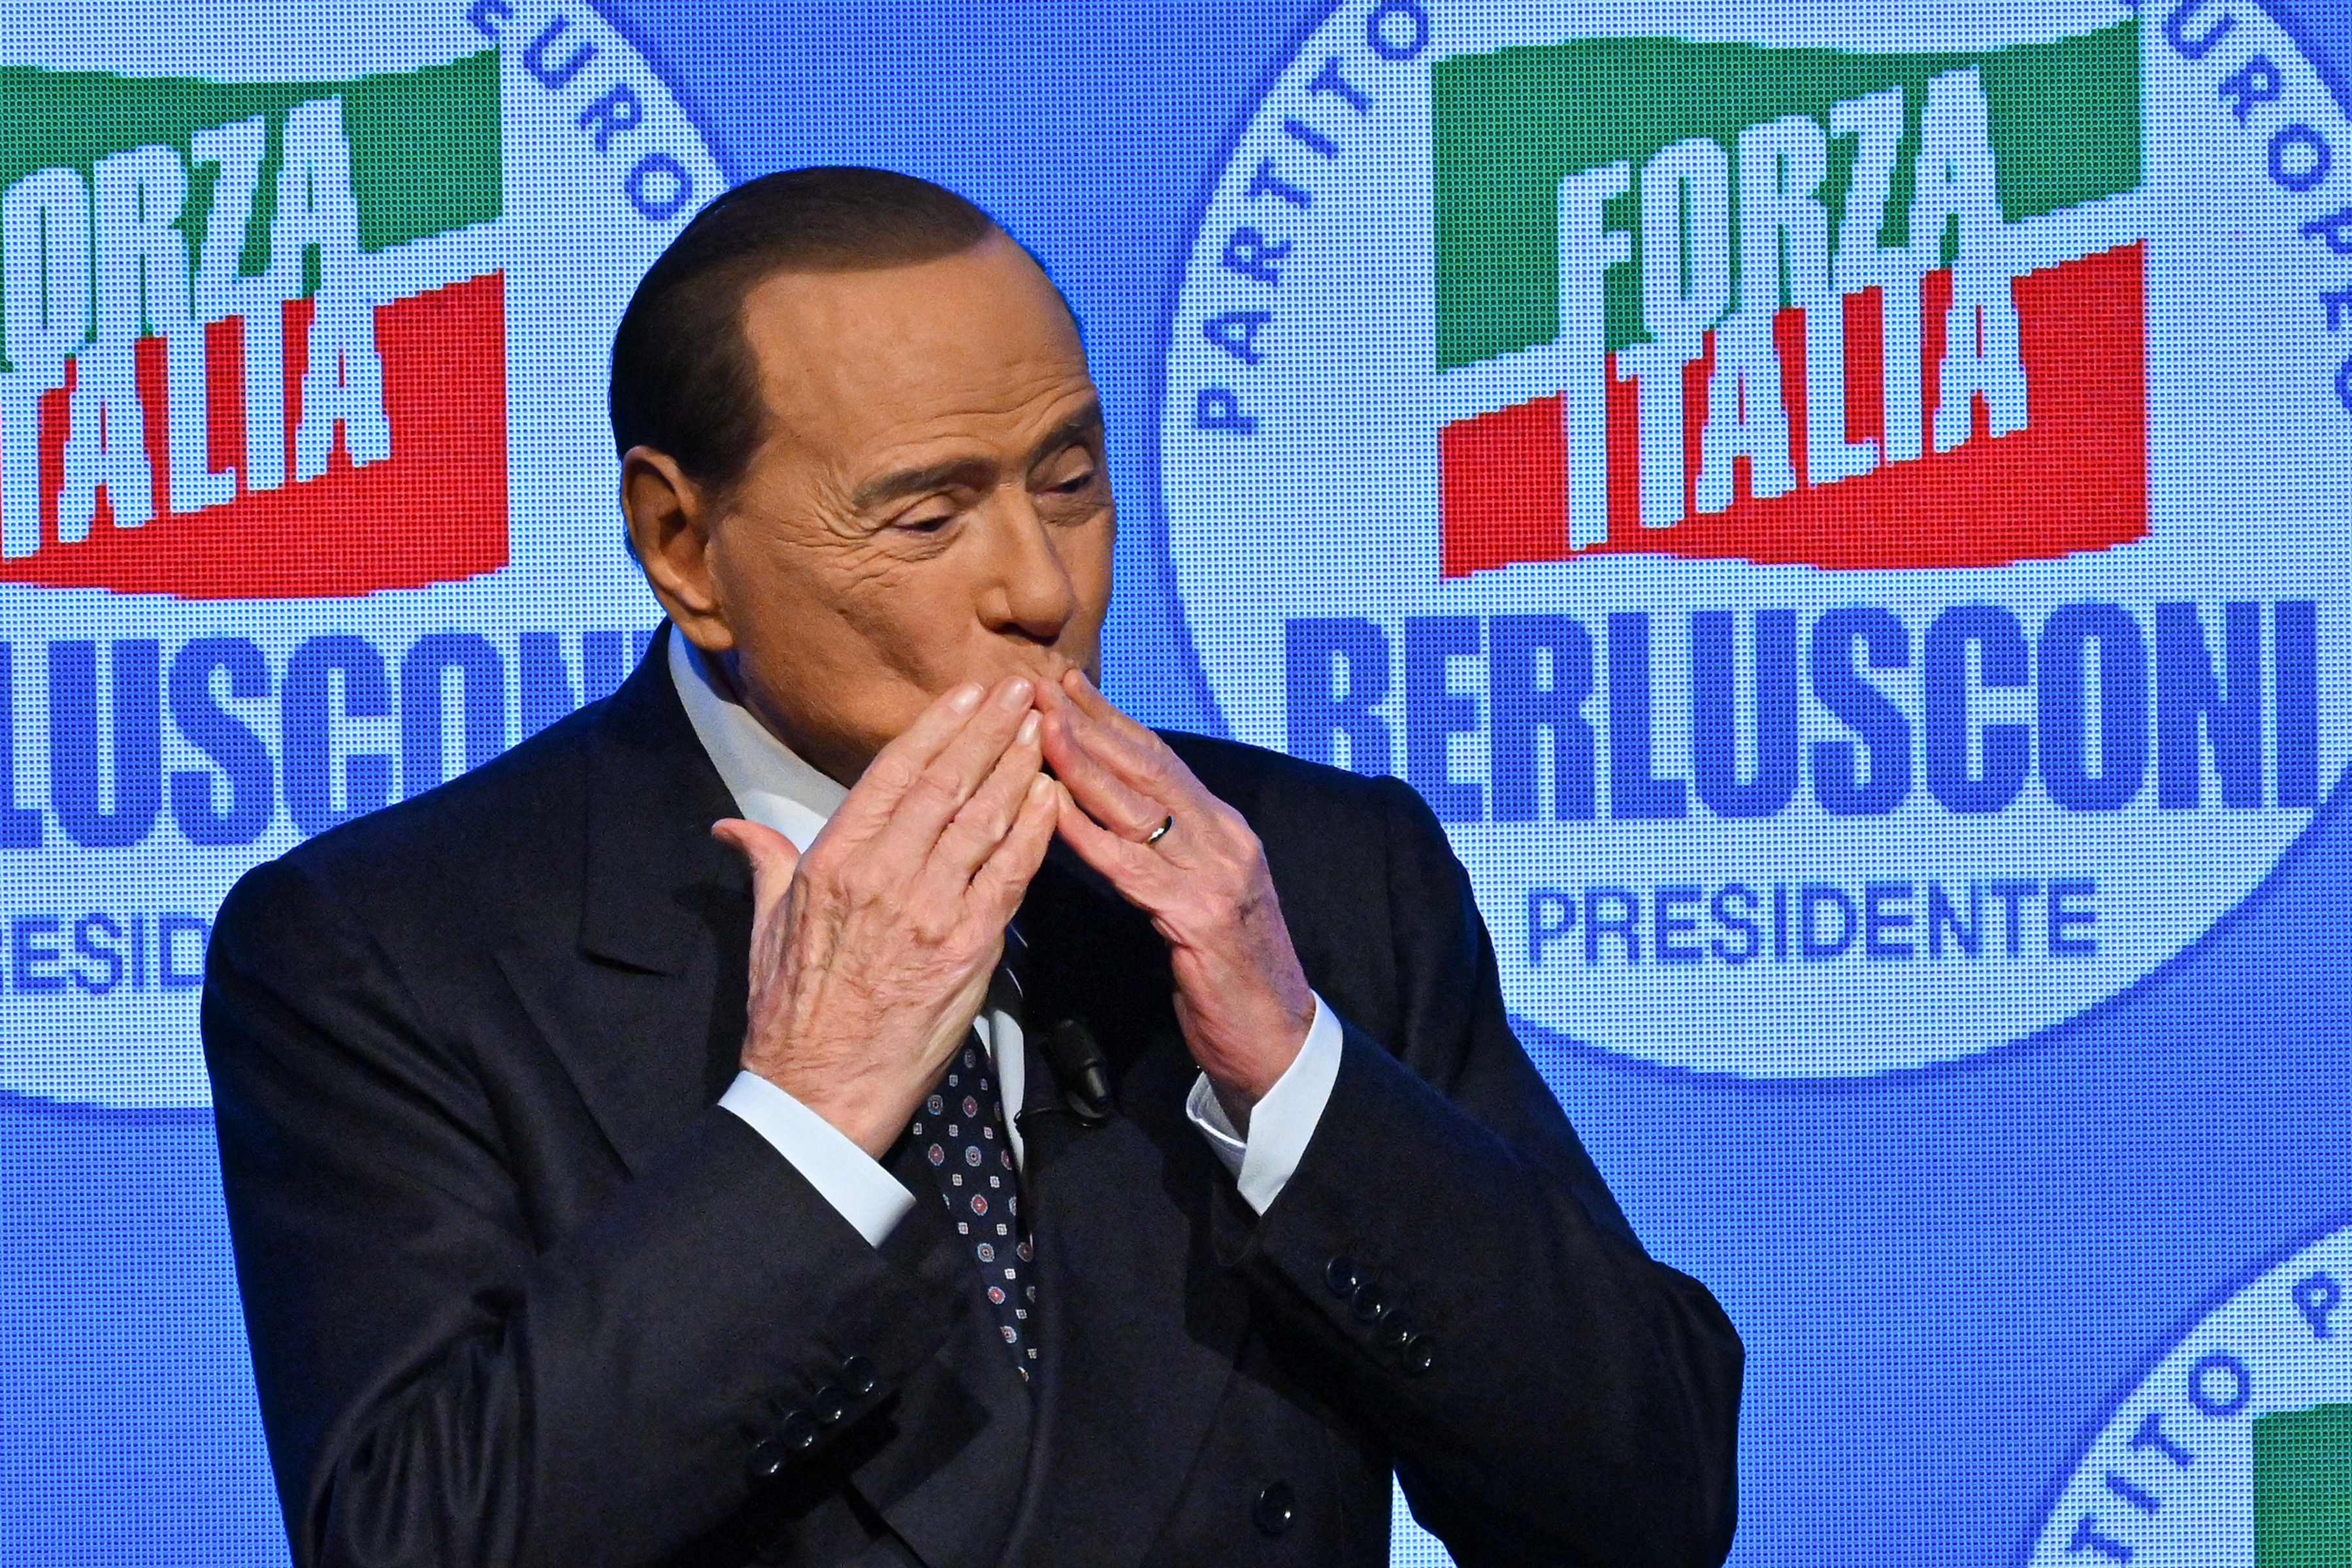 Silvio Berlusconi acknowledges applause on stage in Milan during a meeting at the close of Forza Italia’s campaign for the September general election in 2022